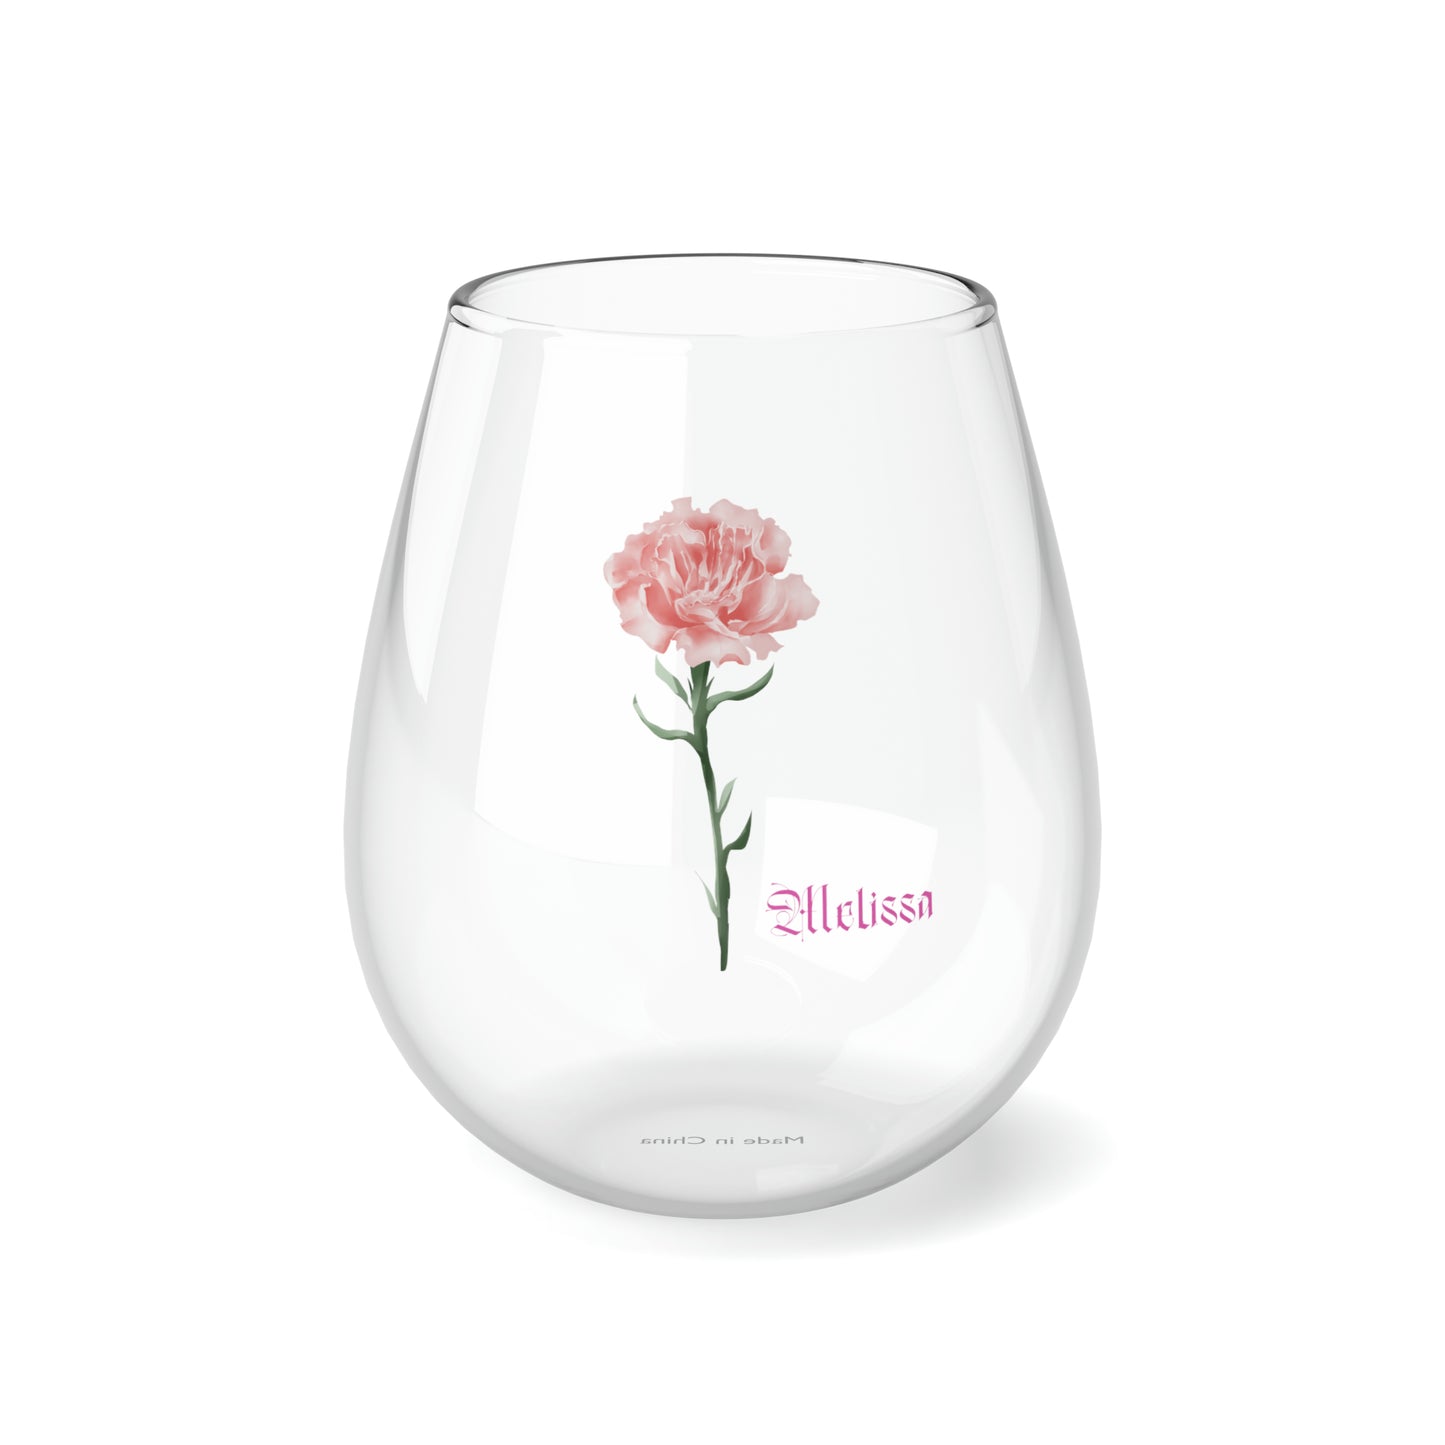 January PERSONALIZED Birth Flower Wine Glass, Birth Flower Gifts, Birth Flower wine glass, Birth Flower Gifts for Women, Gift for coworker, sister gift, birthday gift, Valentine gift, Stemless Wine Glass, 11.75oz